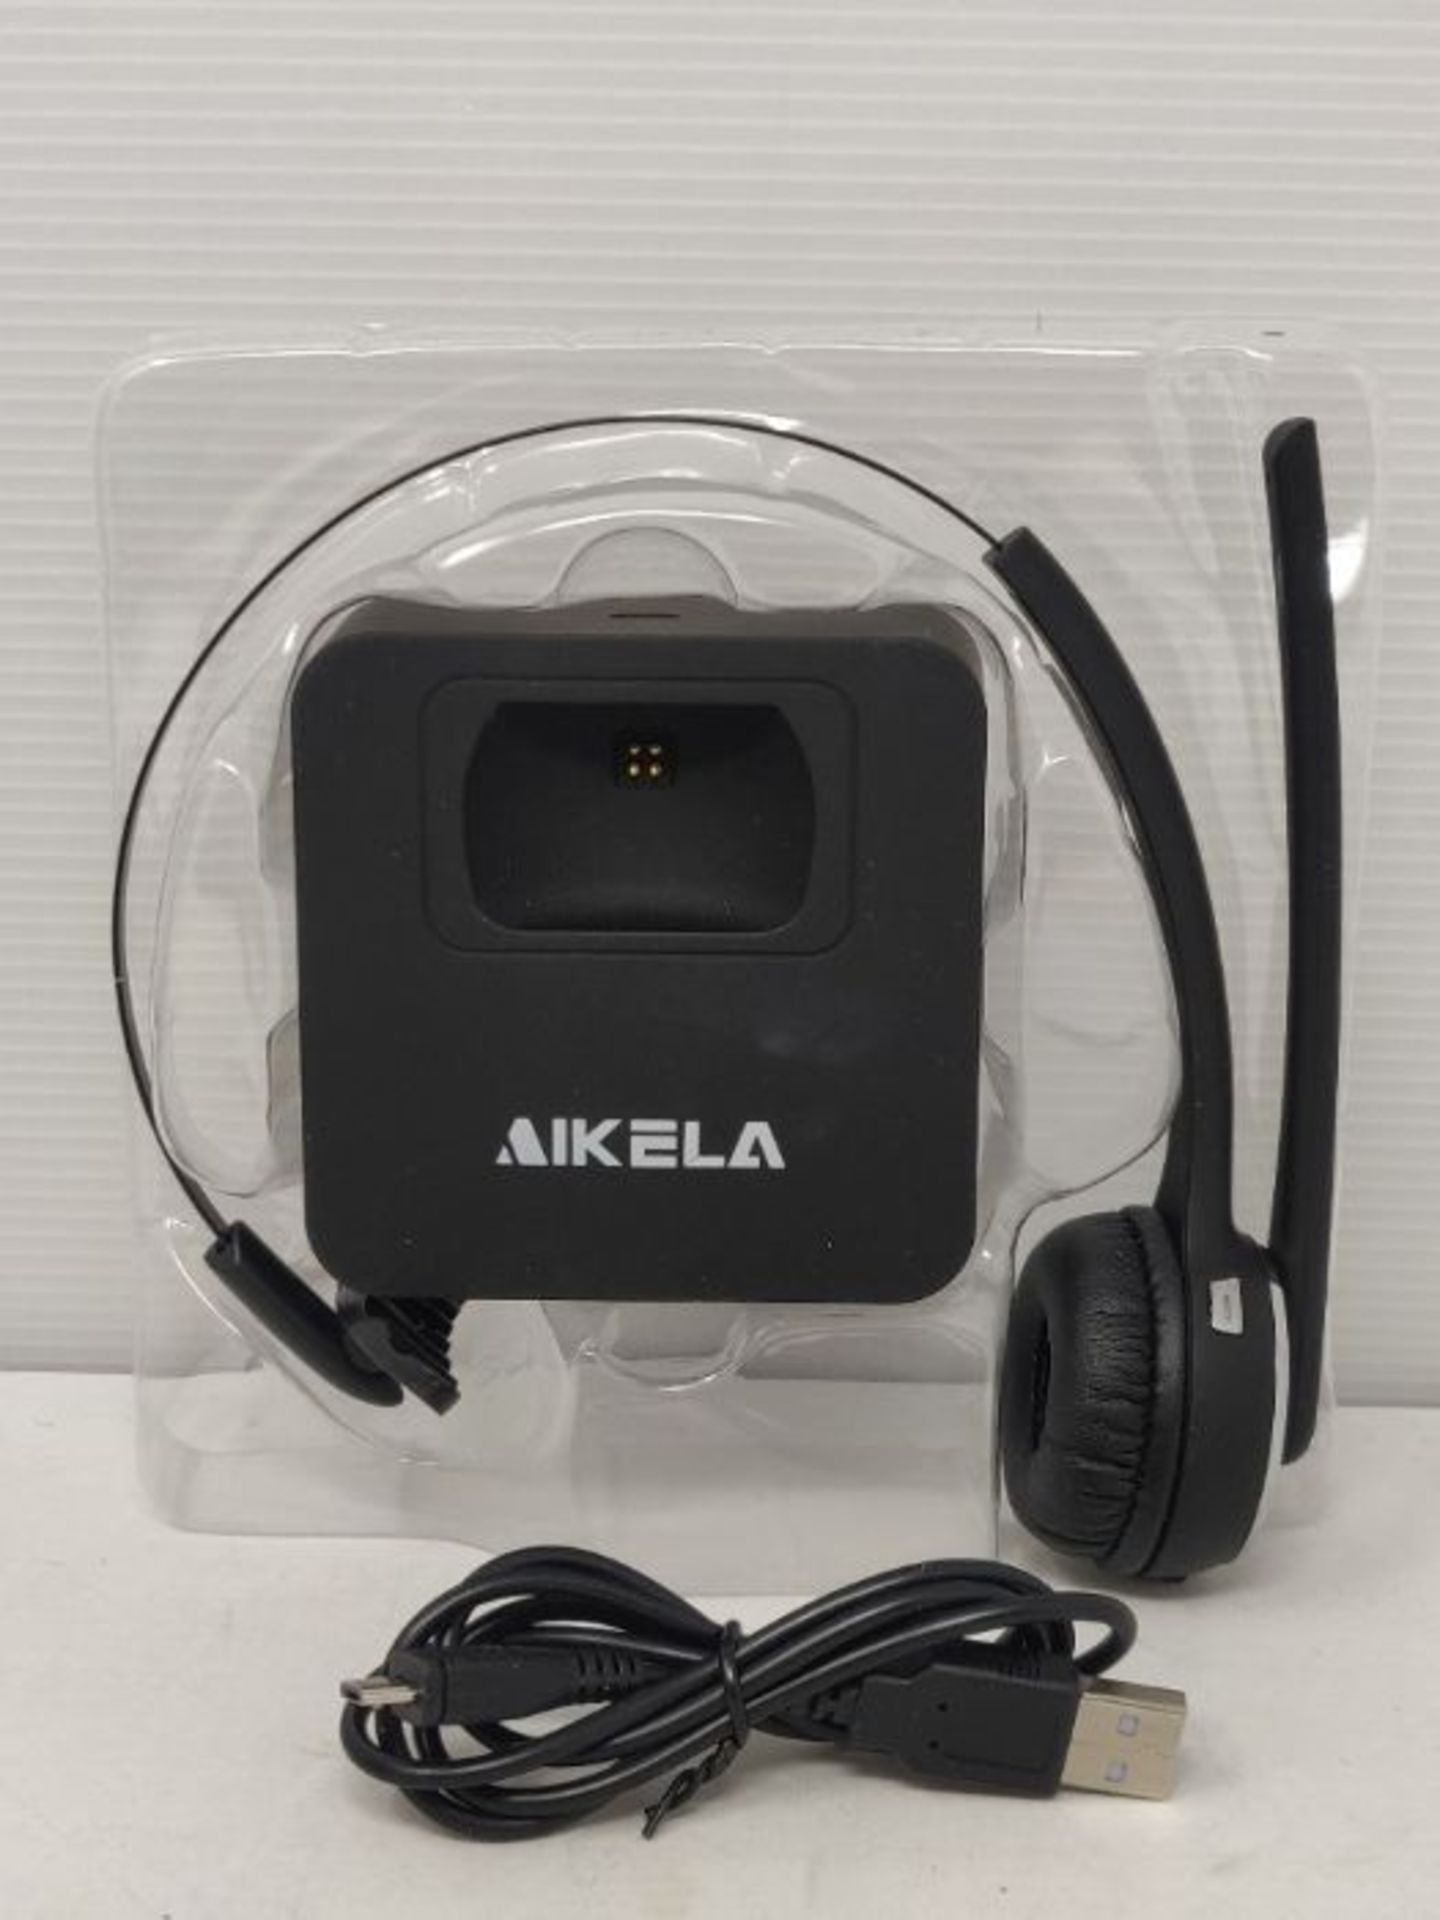 AIKELA V5.0 Bluetooth Headset with Noise Cancelling Microphone, Wireless Headset with - Image 3 of 3